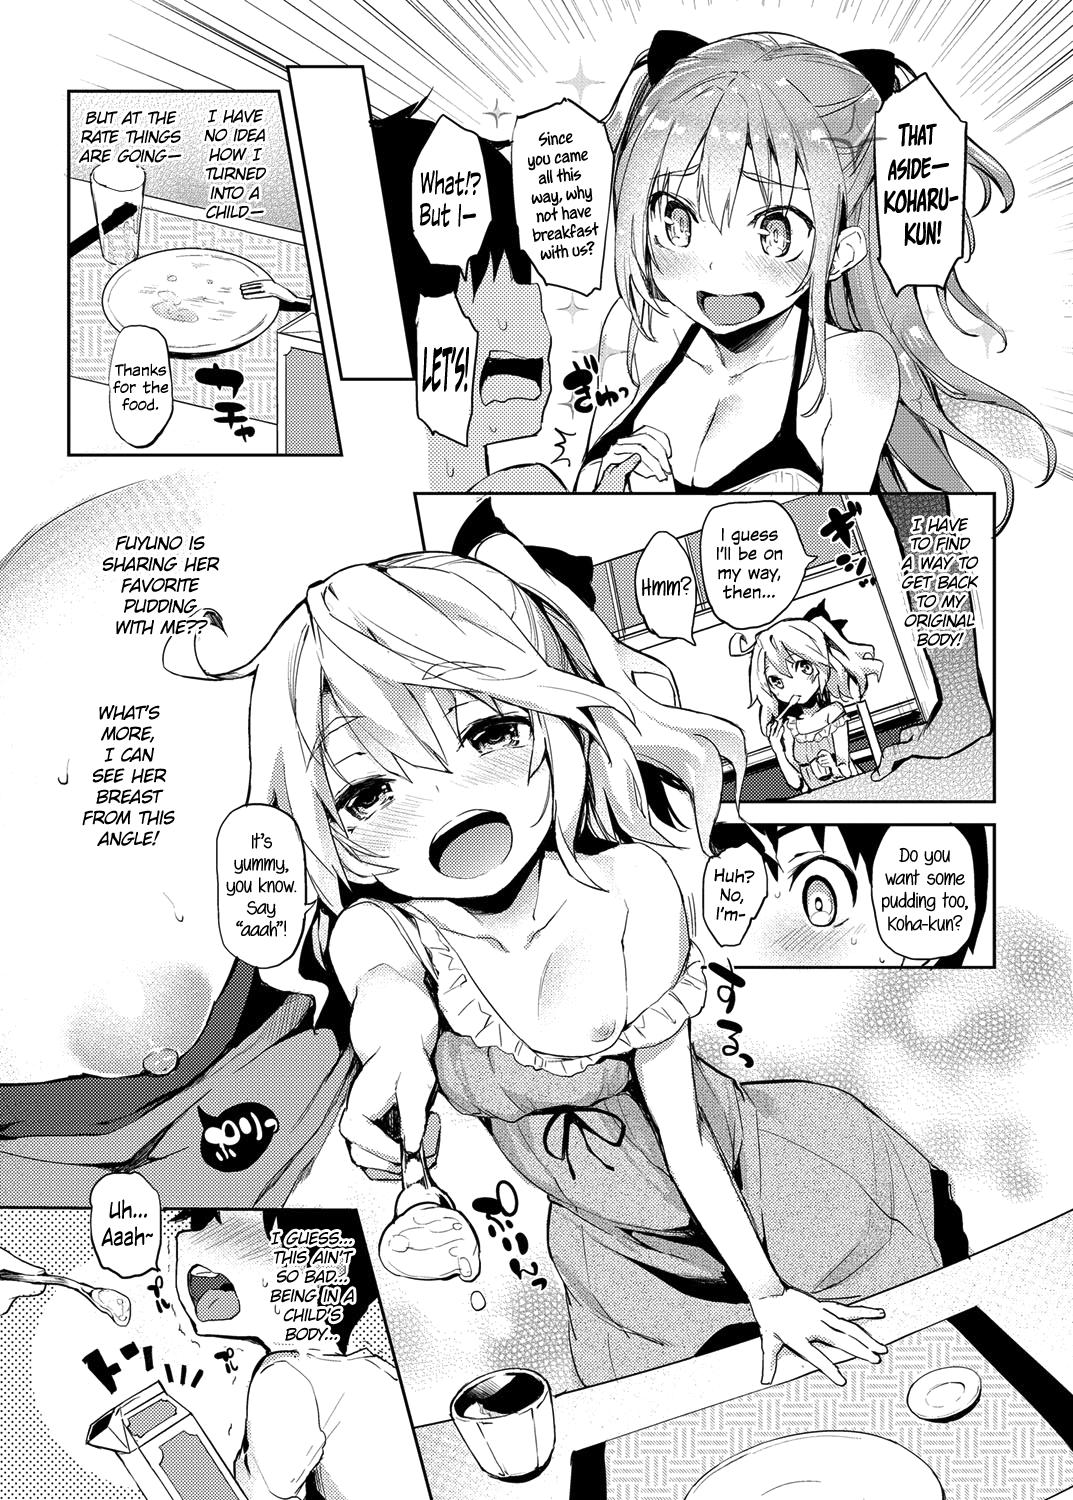 Publico Ane Taiken Shuukan | The Older Sister Experience for a Week ch. 1-5+SP Sperm - Page 7